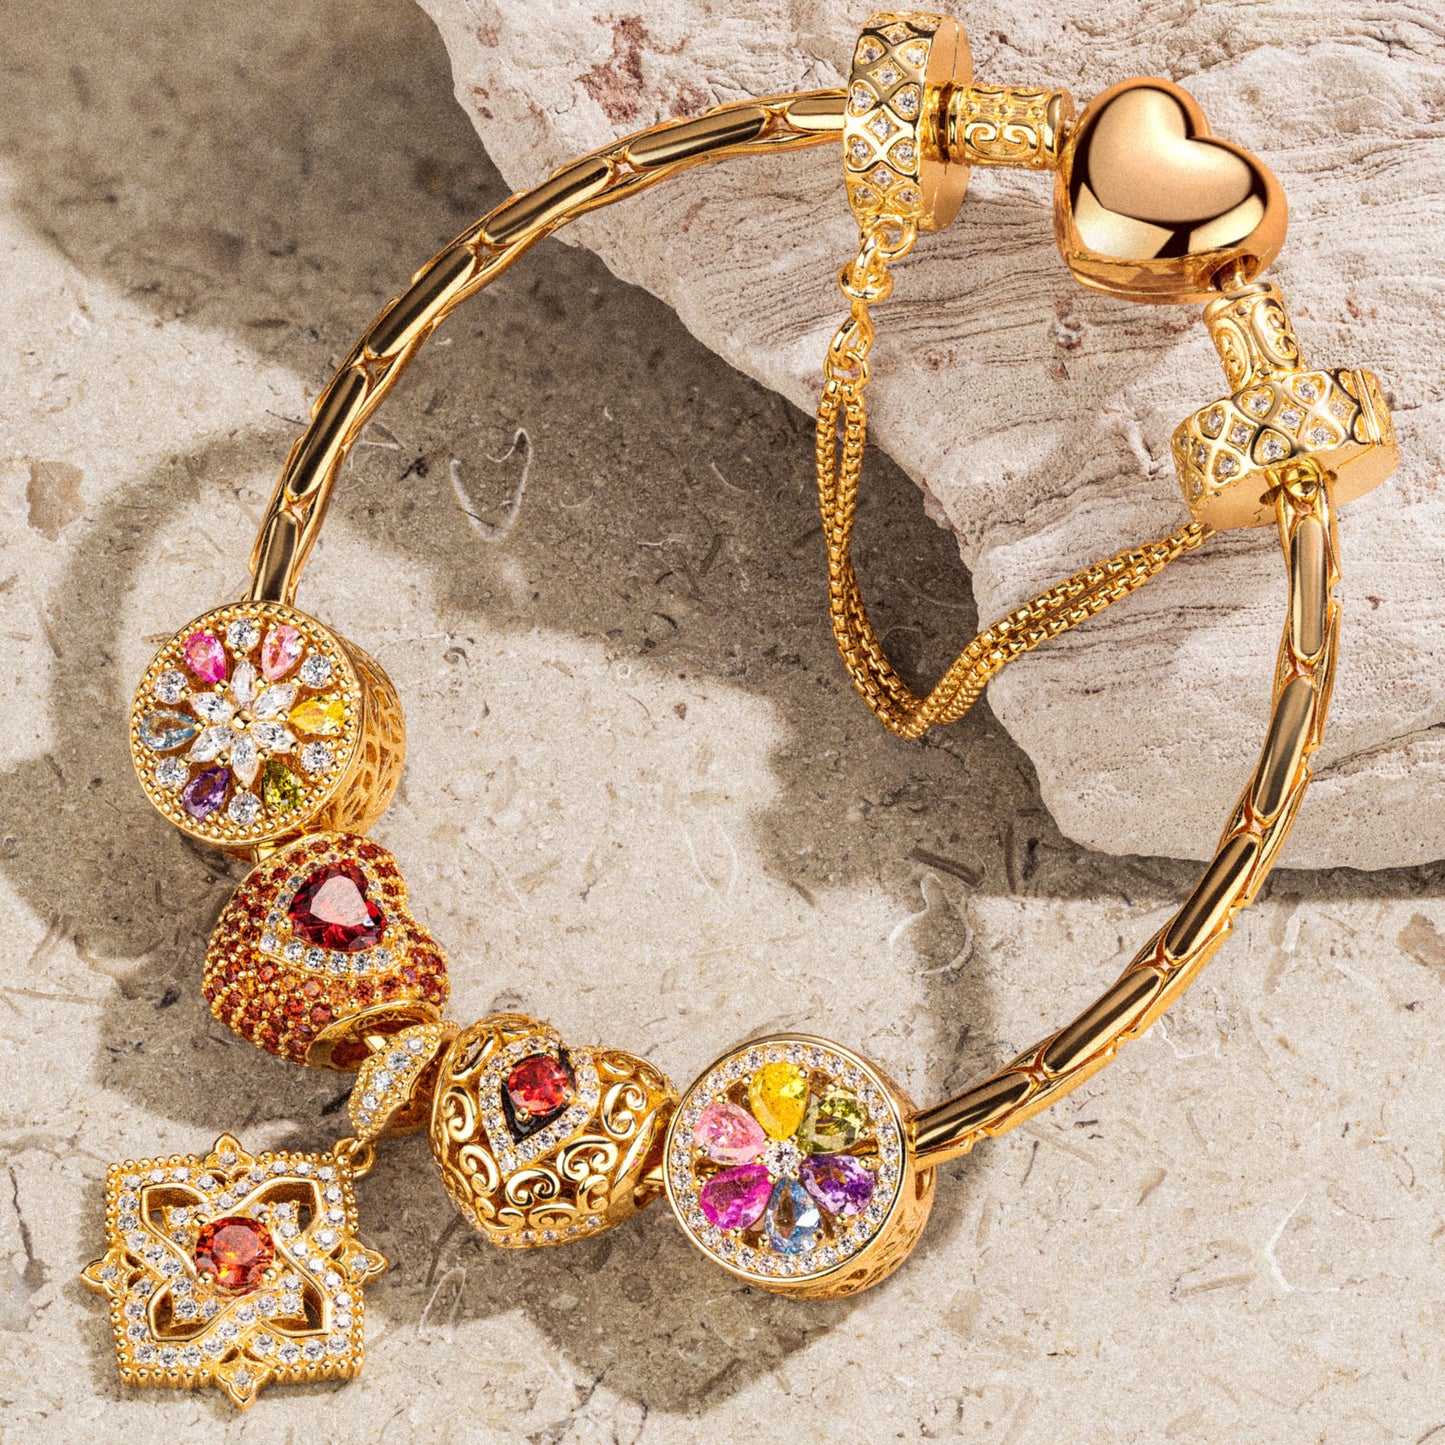 Sterling Silver Amour and Blossom Birthstone Charms Bracelet Set With Enamel In 14K Gold Plated